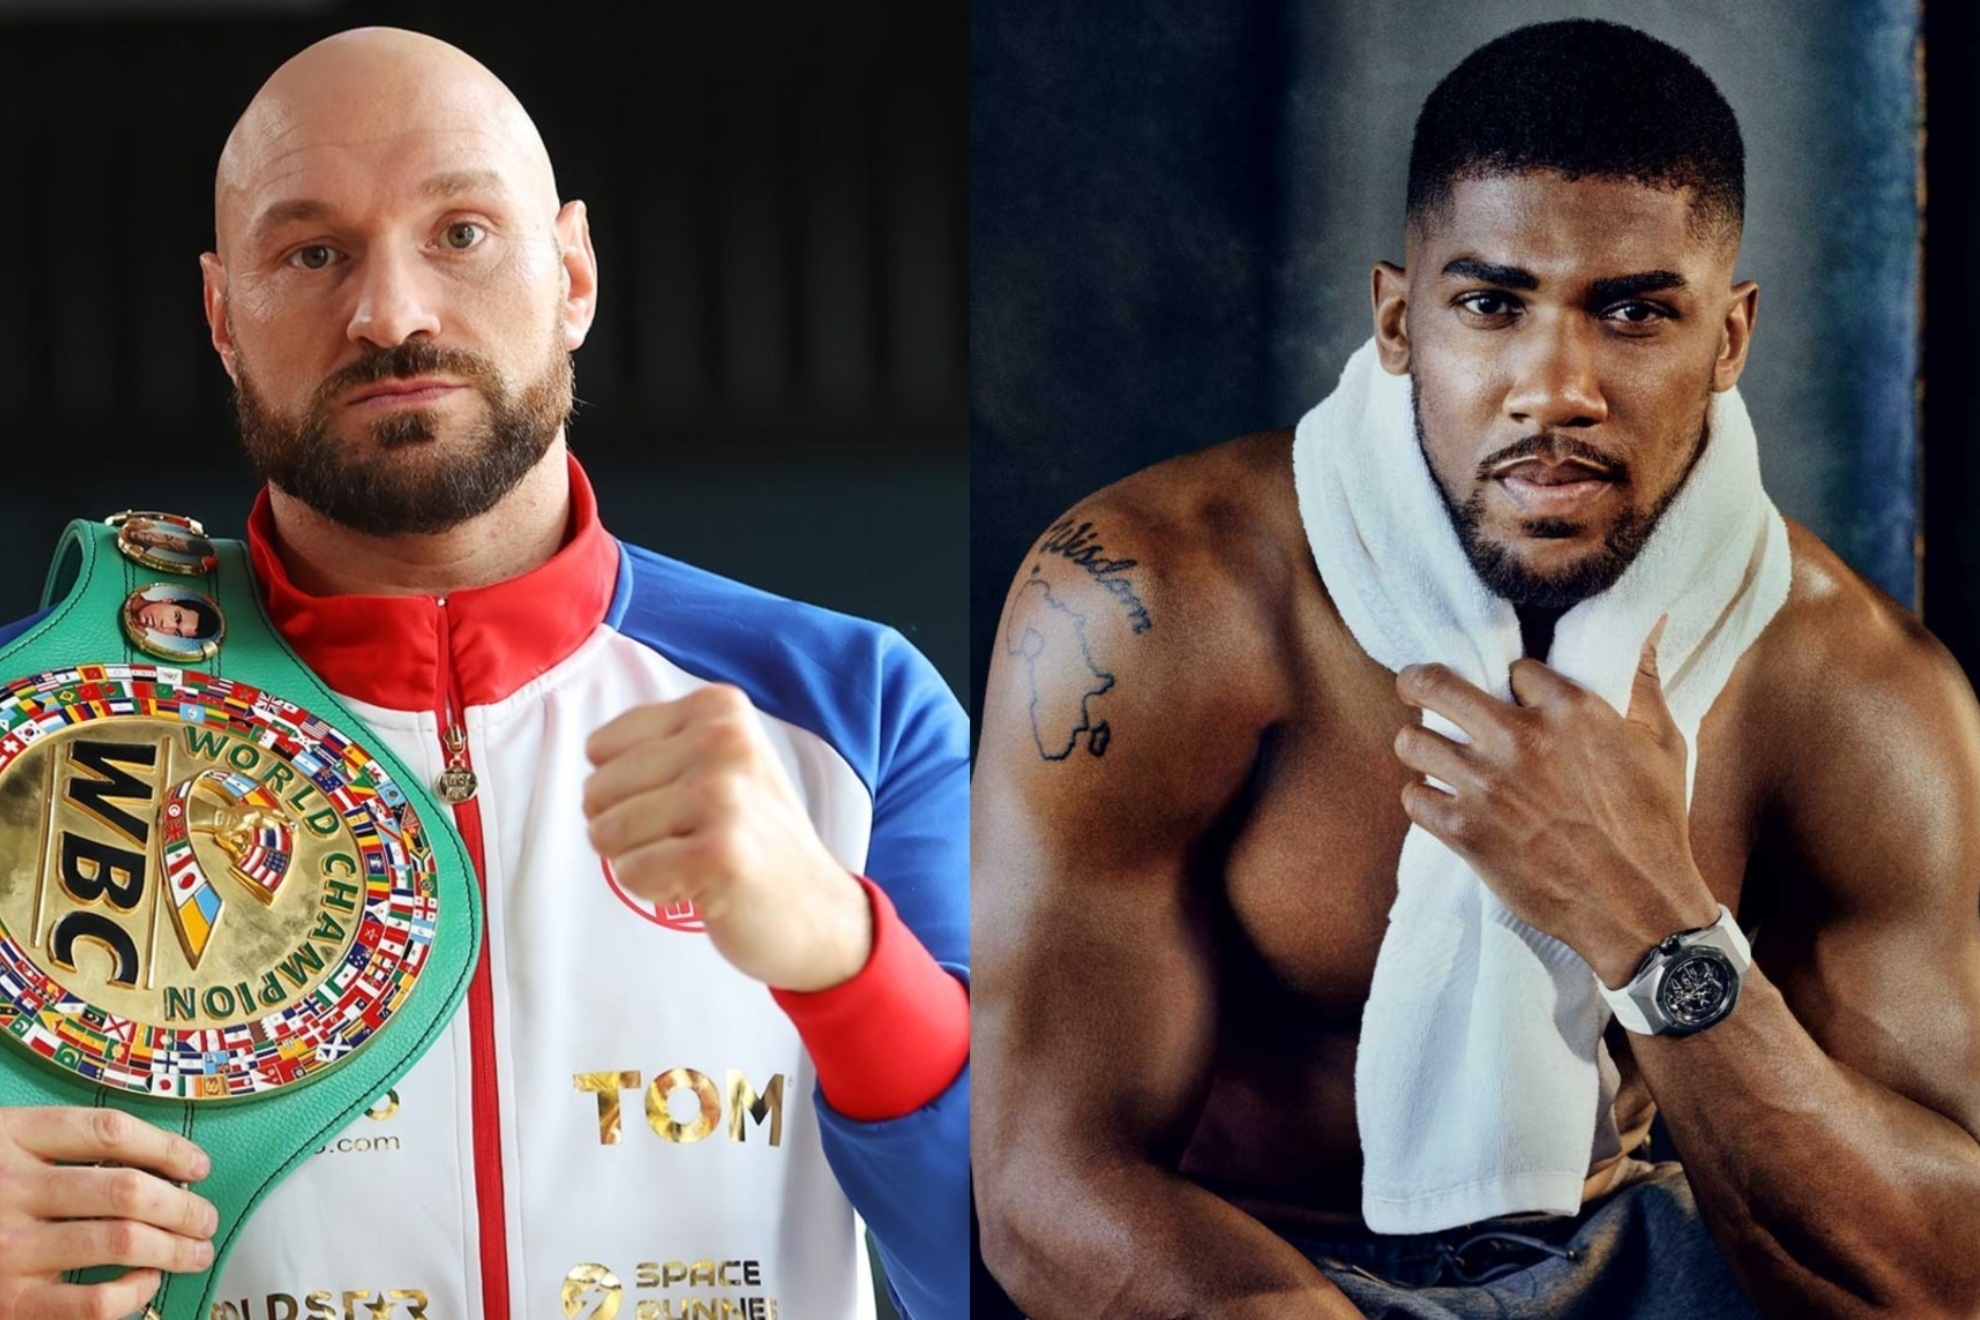 Negotiations for Fury vs Joshua are currently on hold